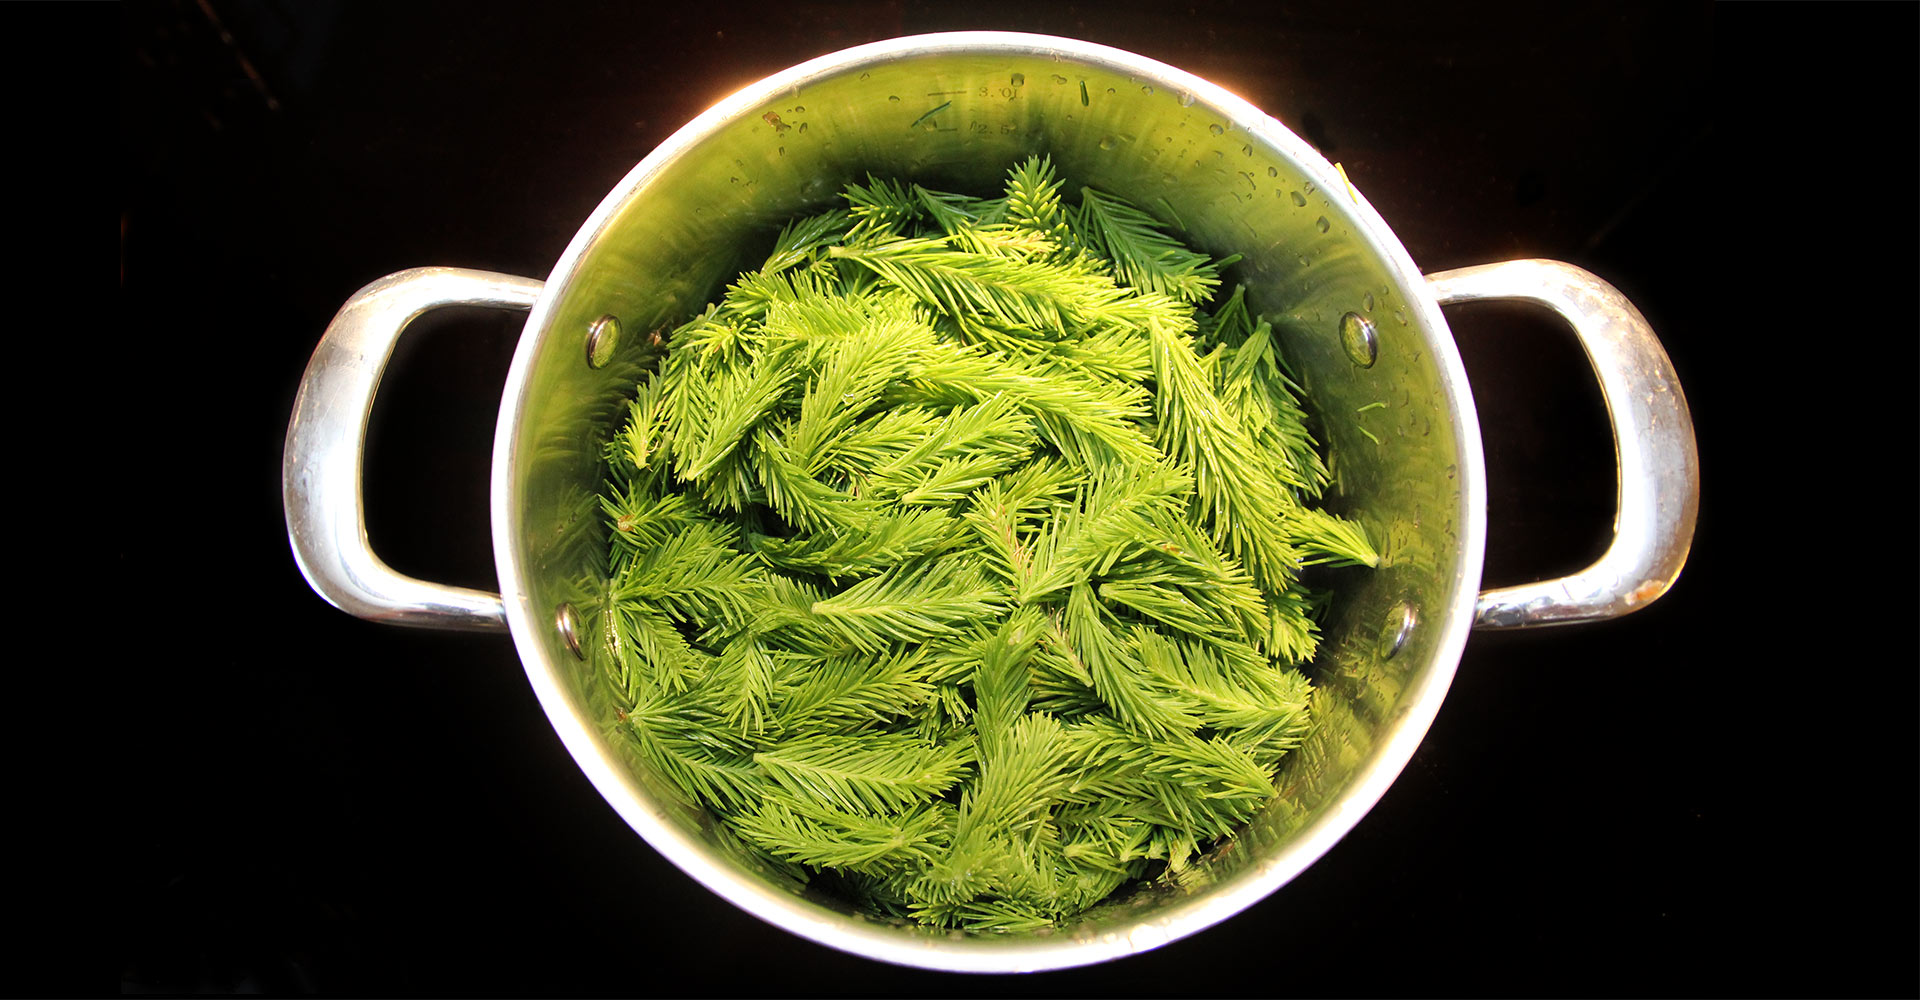 A picture of a kettle of spruce tips on a black background